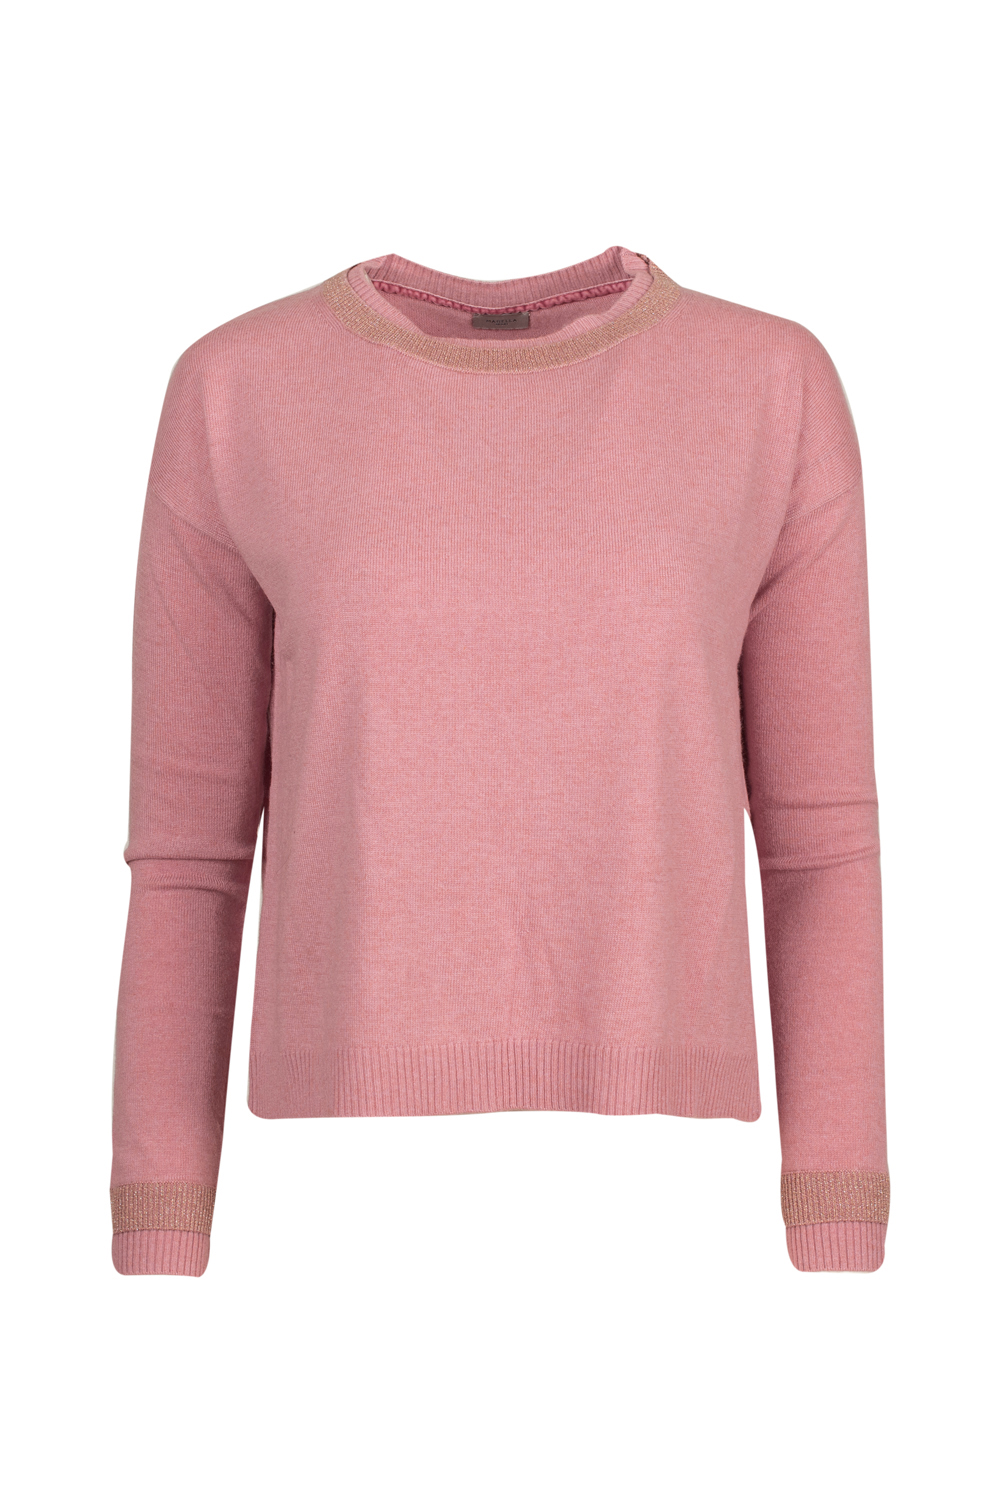 Pink Sweater with Lurex Neck and Sleeve Detail and Slit Back